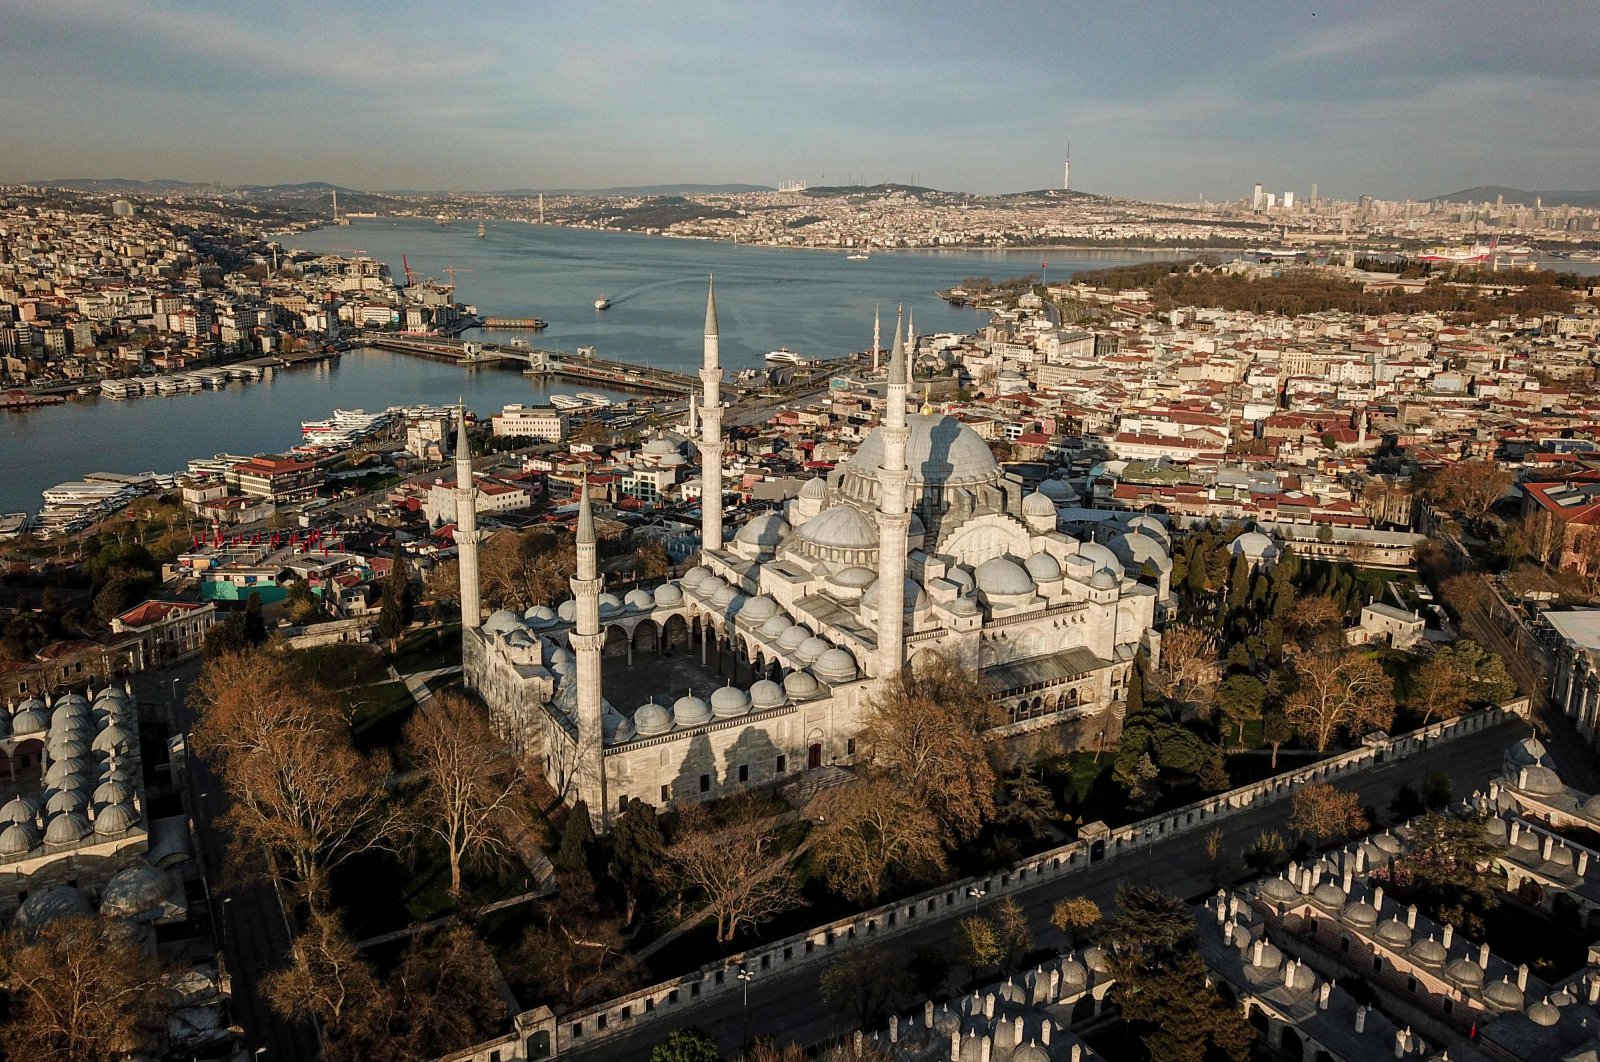 An aerial photo shows a general view of the Süleymaniye Mosque and the Bosporus, Istanbul, Turkey, April 19, 2020. (AFP Photo)